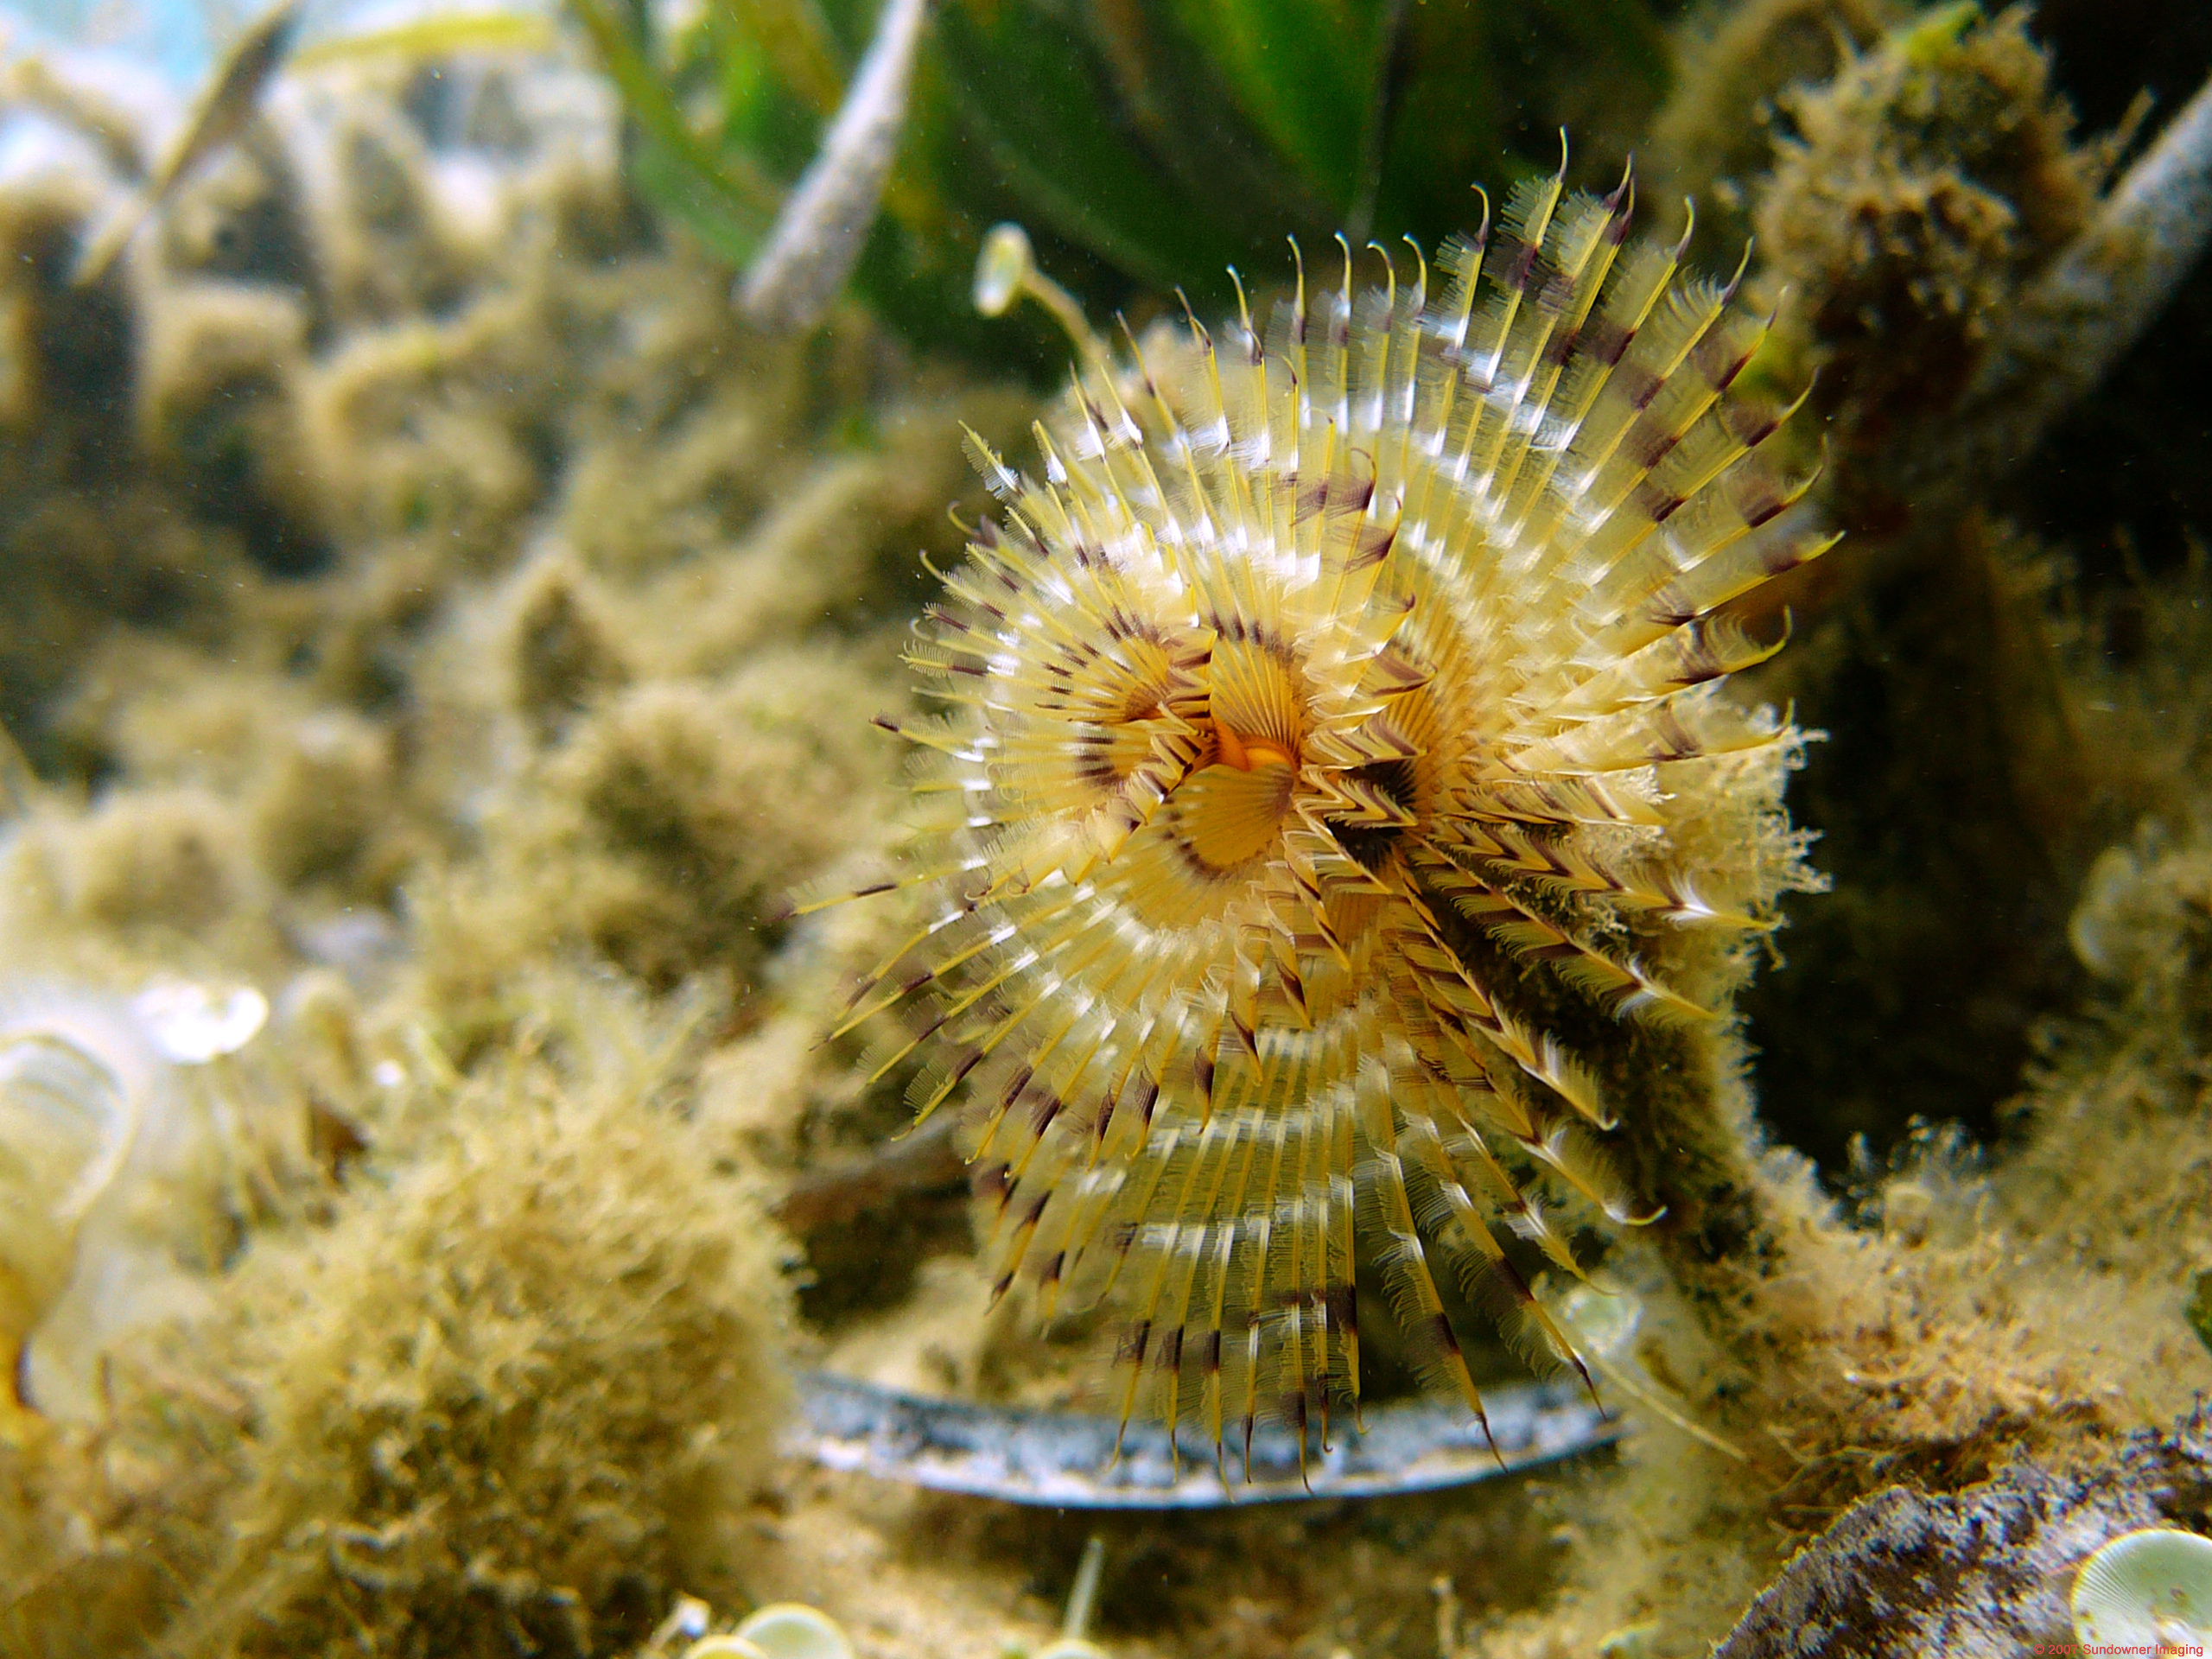 Christmas tree worms make their homes in the waters surrounding Wicked Wall dive site in Samoa